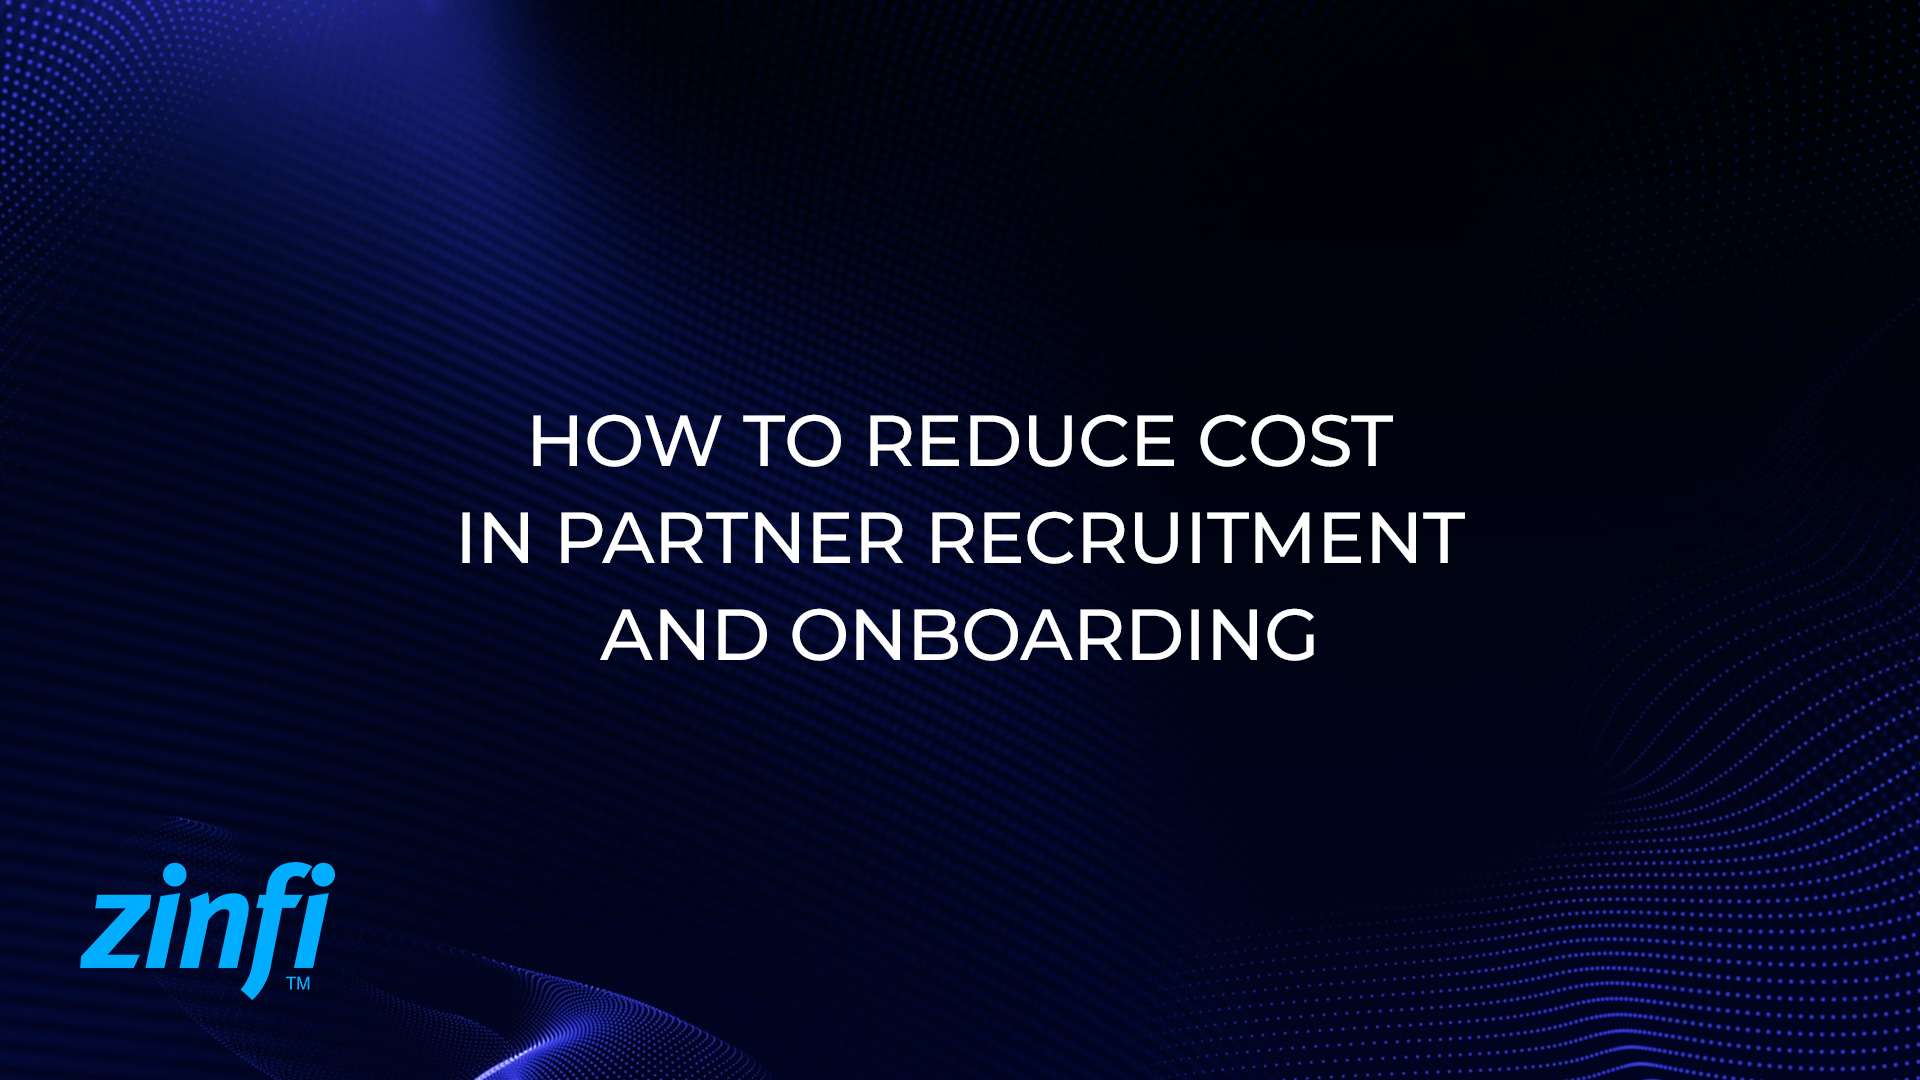 Reduce Cost in Partner Recruitment and Onboarding